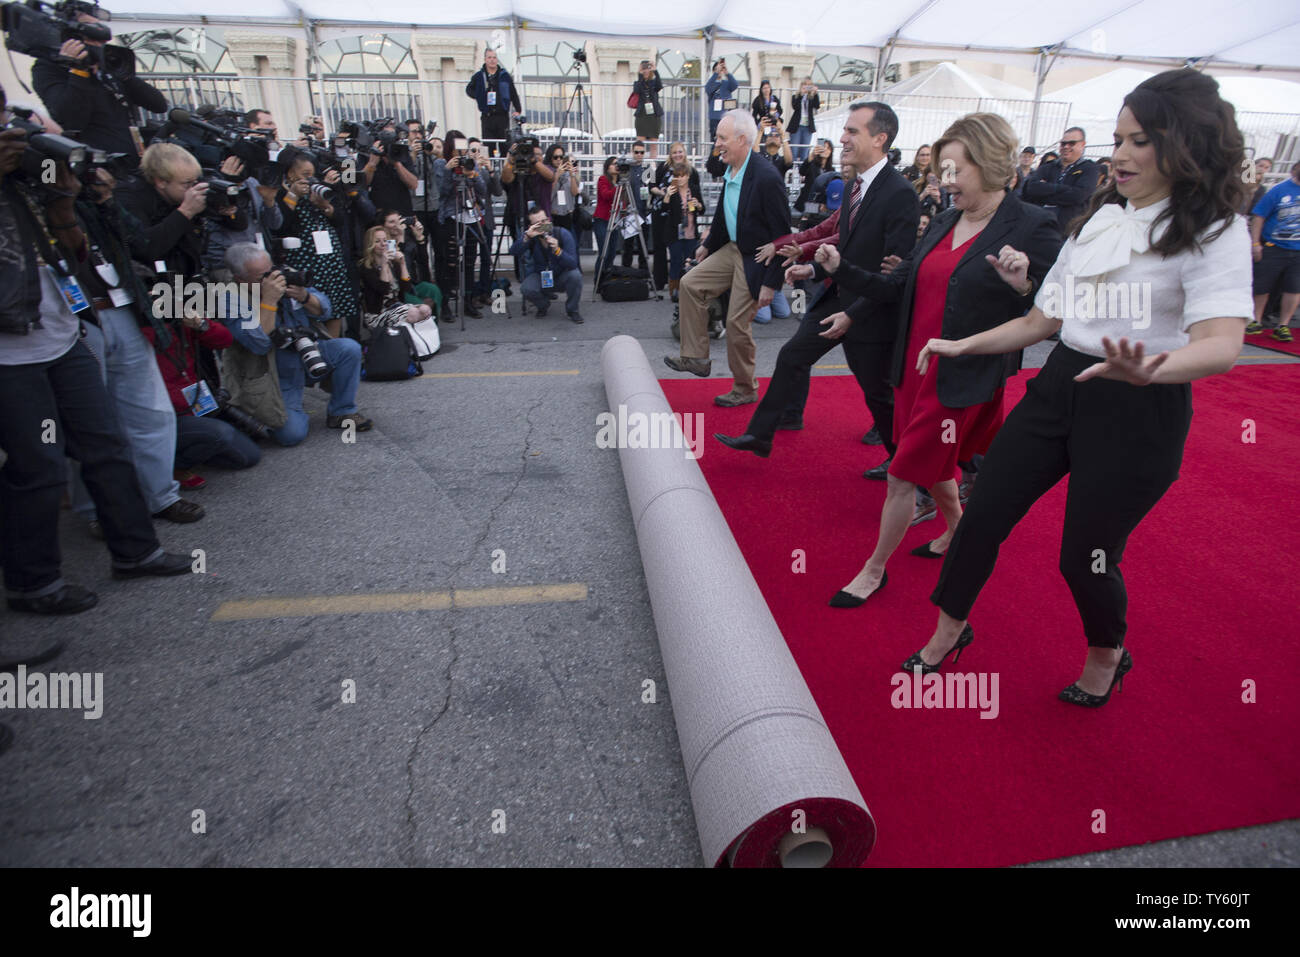 Daryl Anderson (L-R), Kathy Connell, Eric Garcetti, Lea DeLaria, JoBeth Williams and Katie Lowes participate in the red carpet rollout as preparations are underway for the 22nd Annual Screen Actors Guild Awards in Los Angeles on January 29, 2016. The awards will be presented on January 30.     Photo by Phil McCarten/UPI Stock Photo